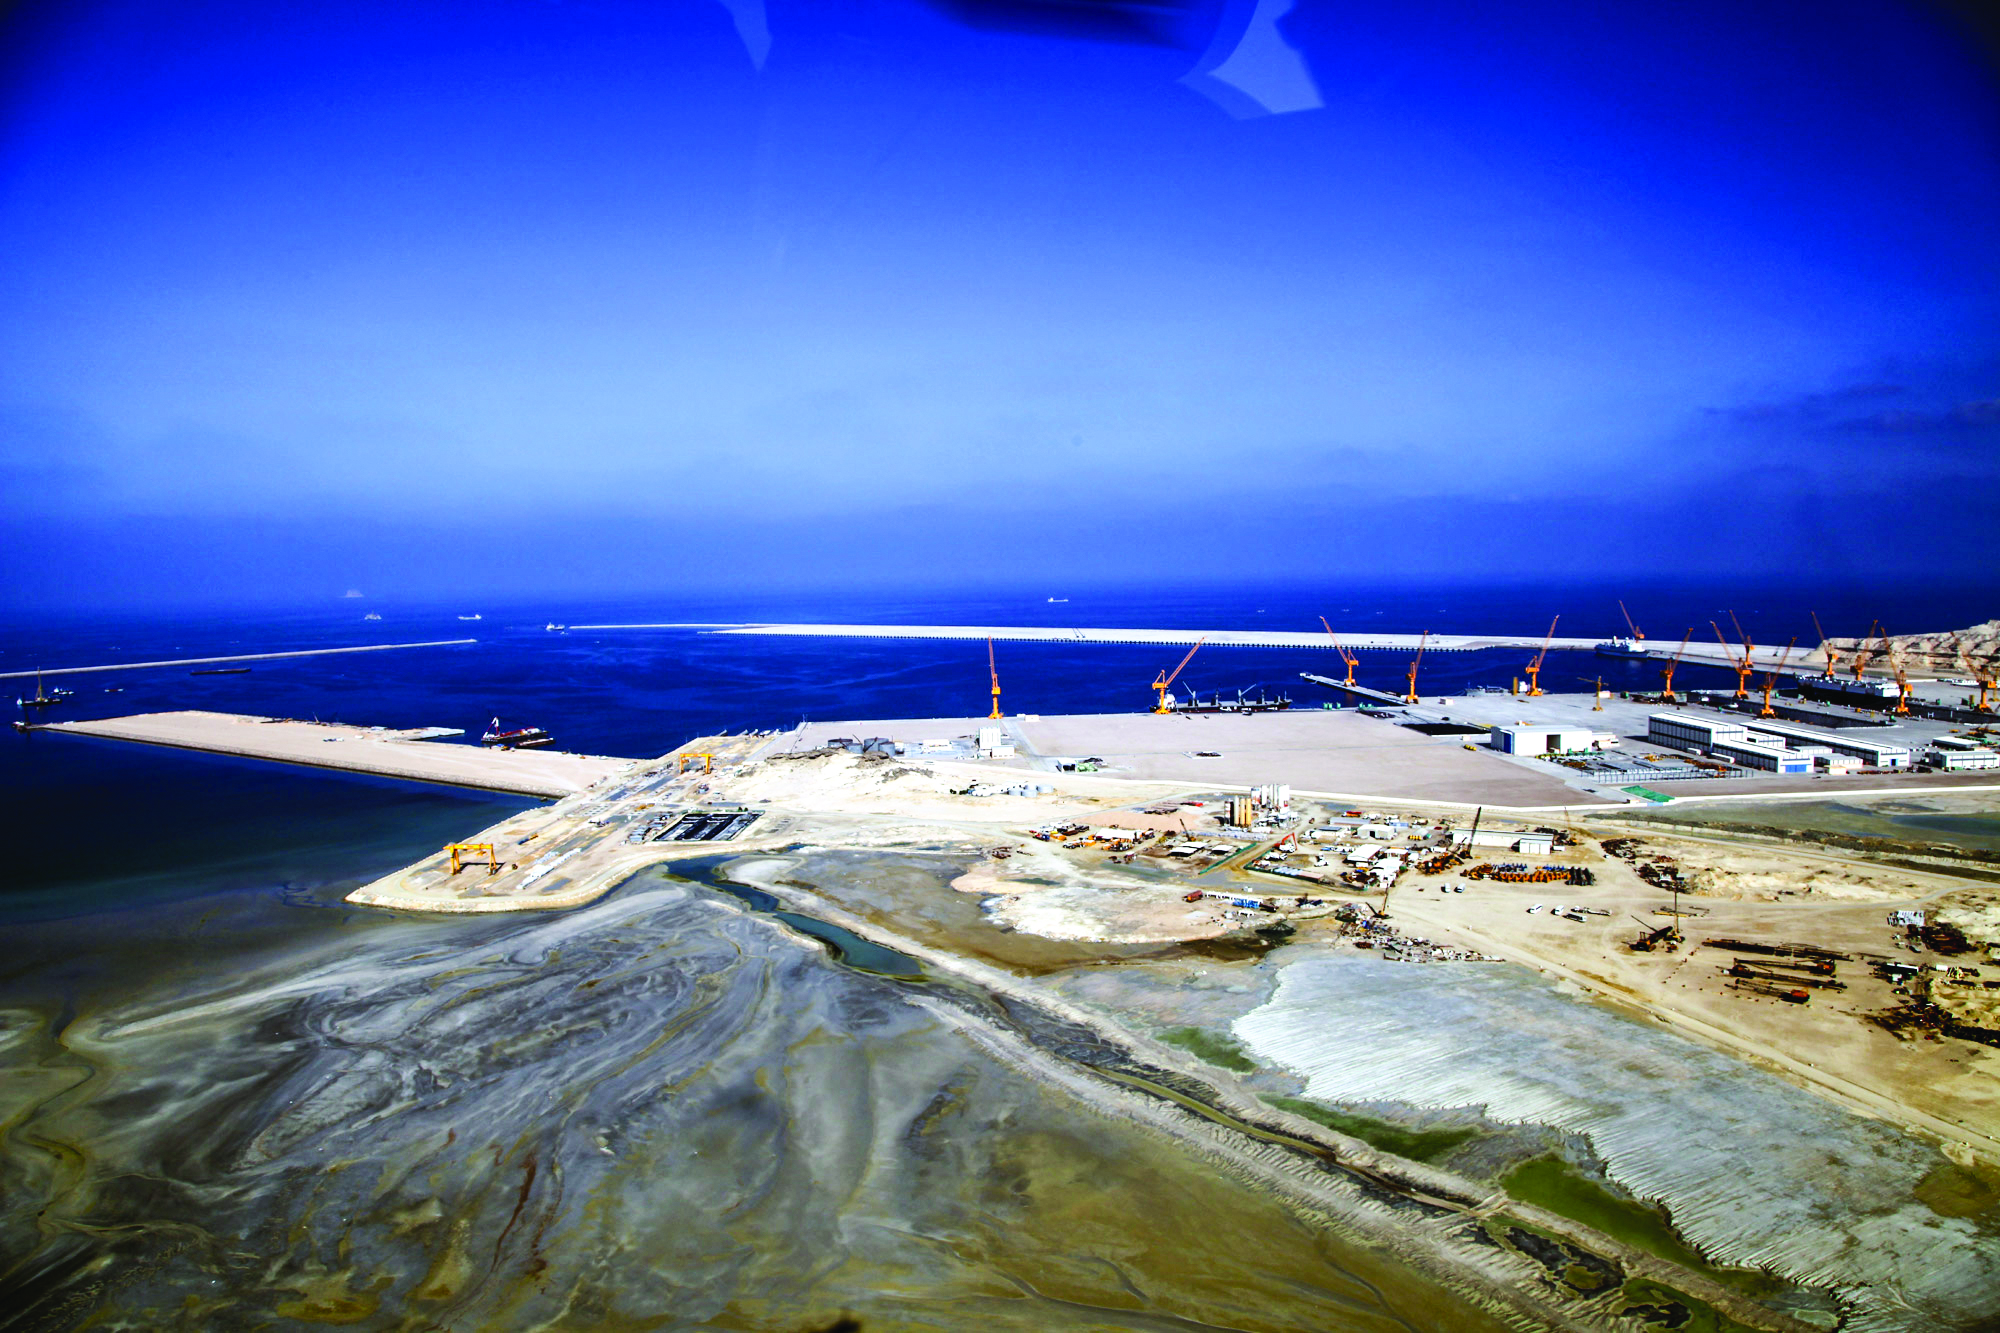 Duqm container terminal expected to start operation by early 2020